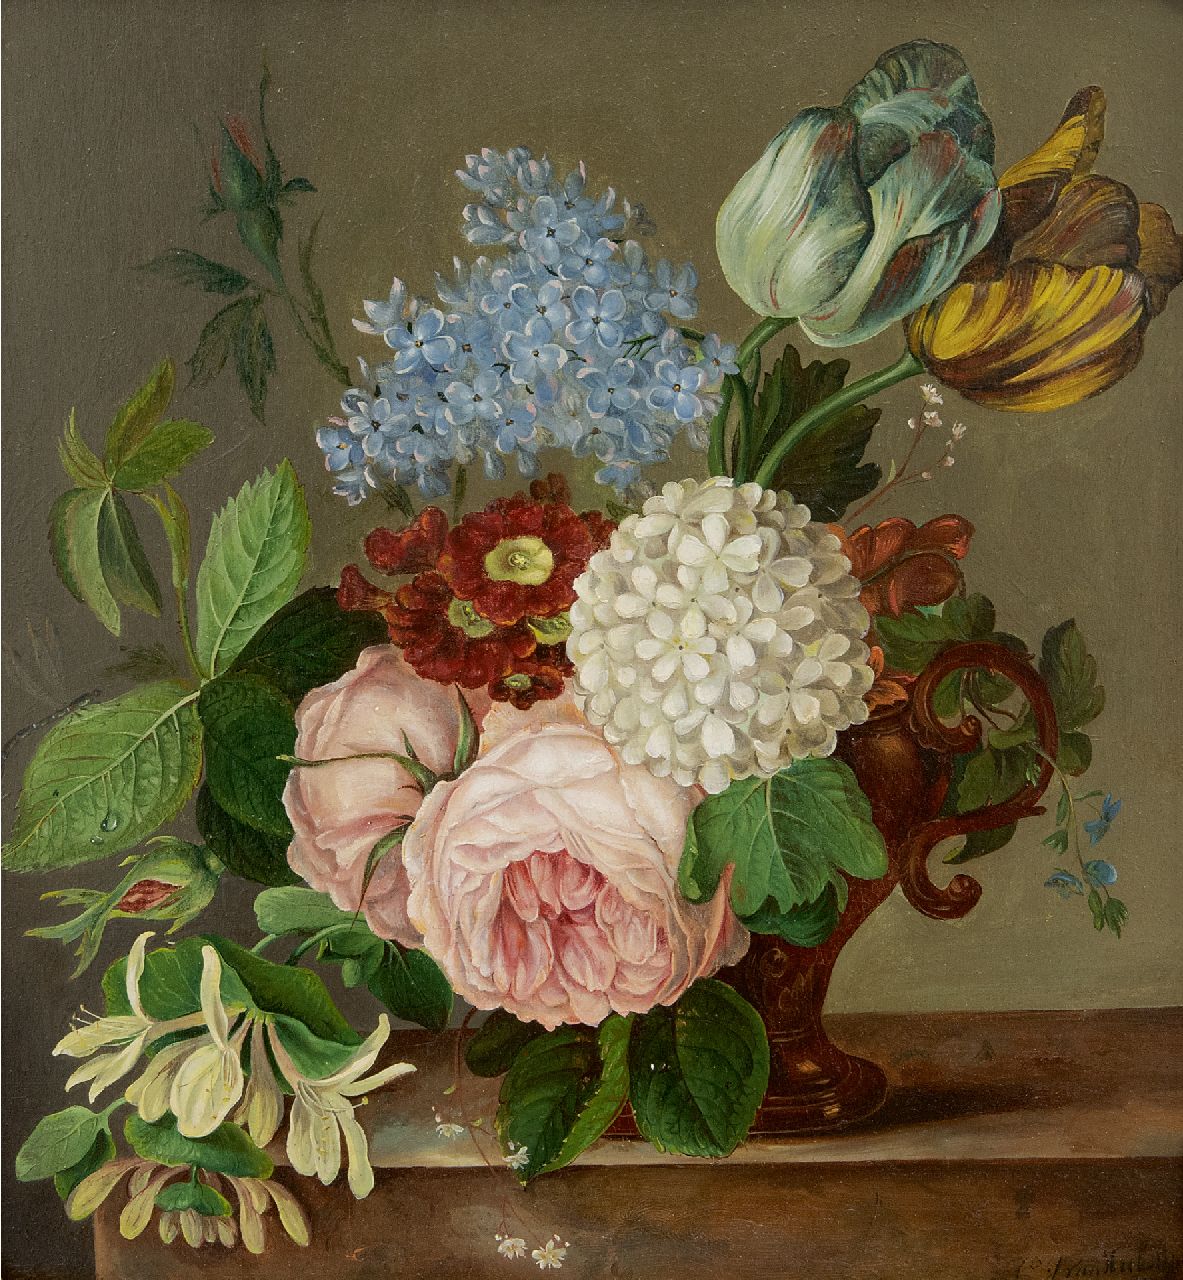 Hulstijn C.J. van | Cornelis Johannes 'Johan' van Hulstijn | Paintings offered for sale | A still life with roses, tulips, primula and other flowers, oil on panel 29.3 x 26.9 cm, signed l.r.